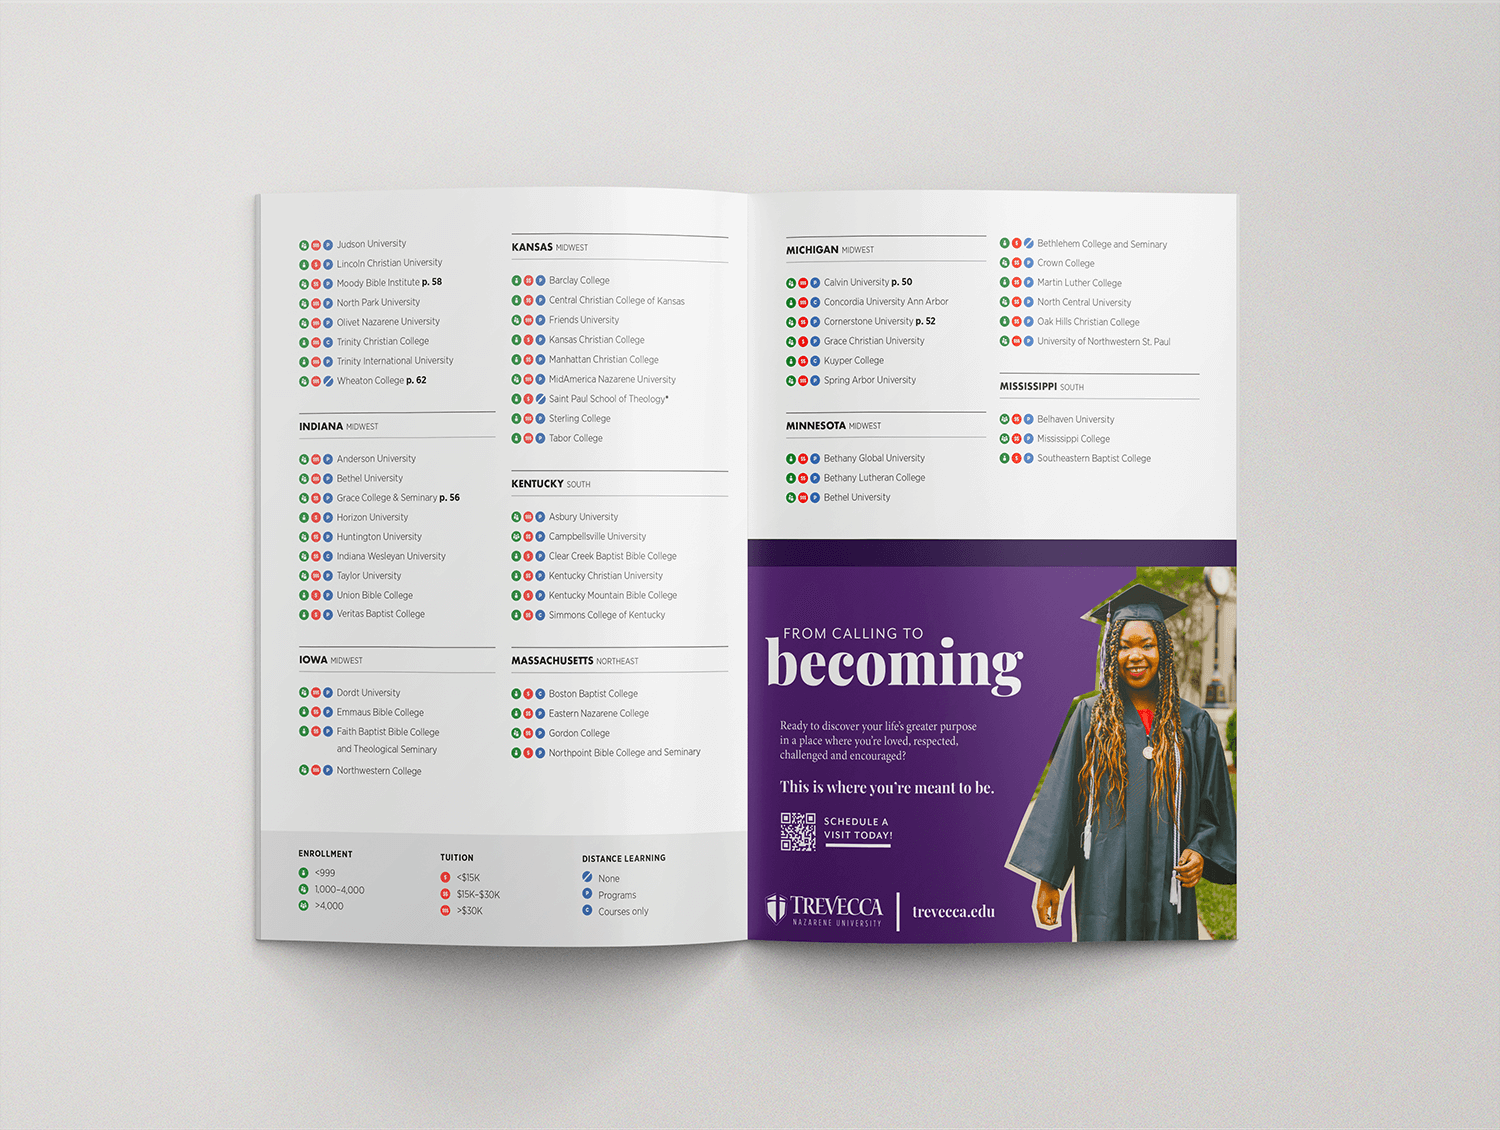 2024 Christian College Guide: Presented by CT Creative Studio